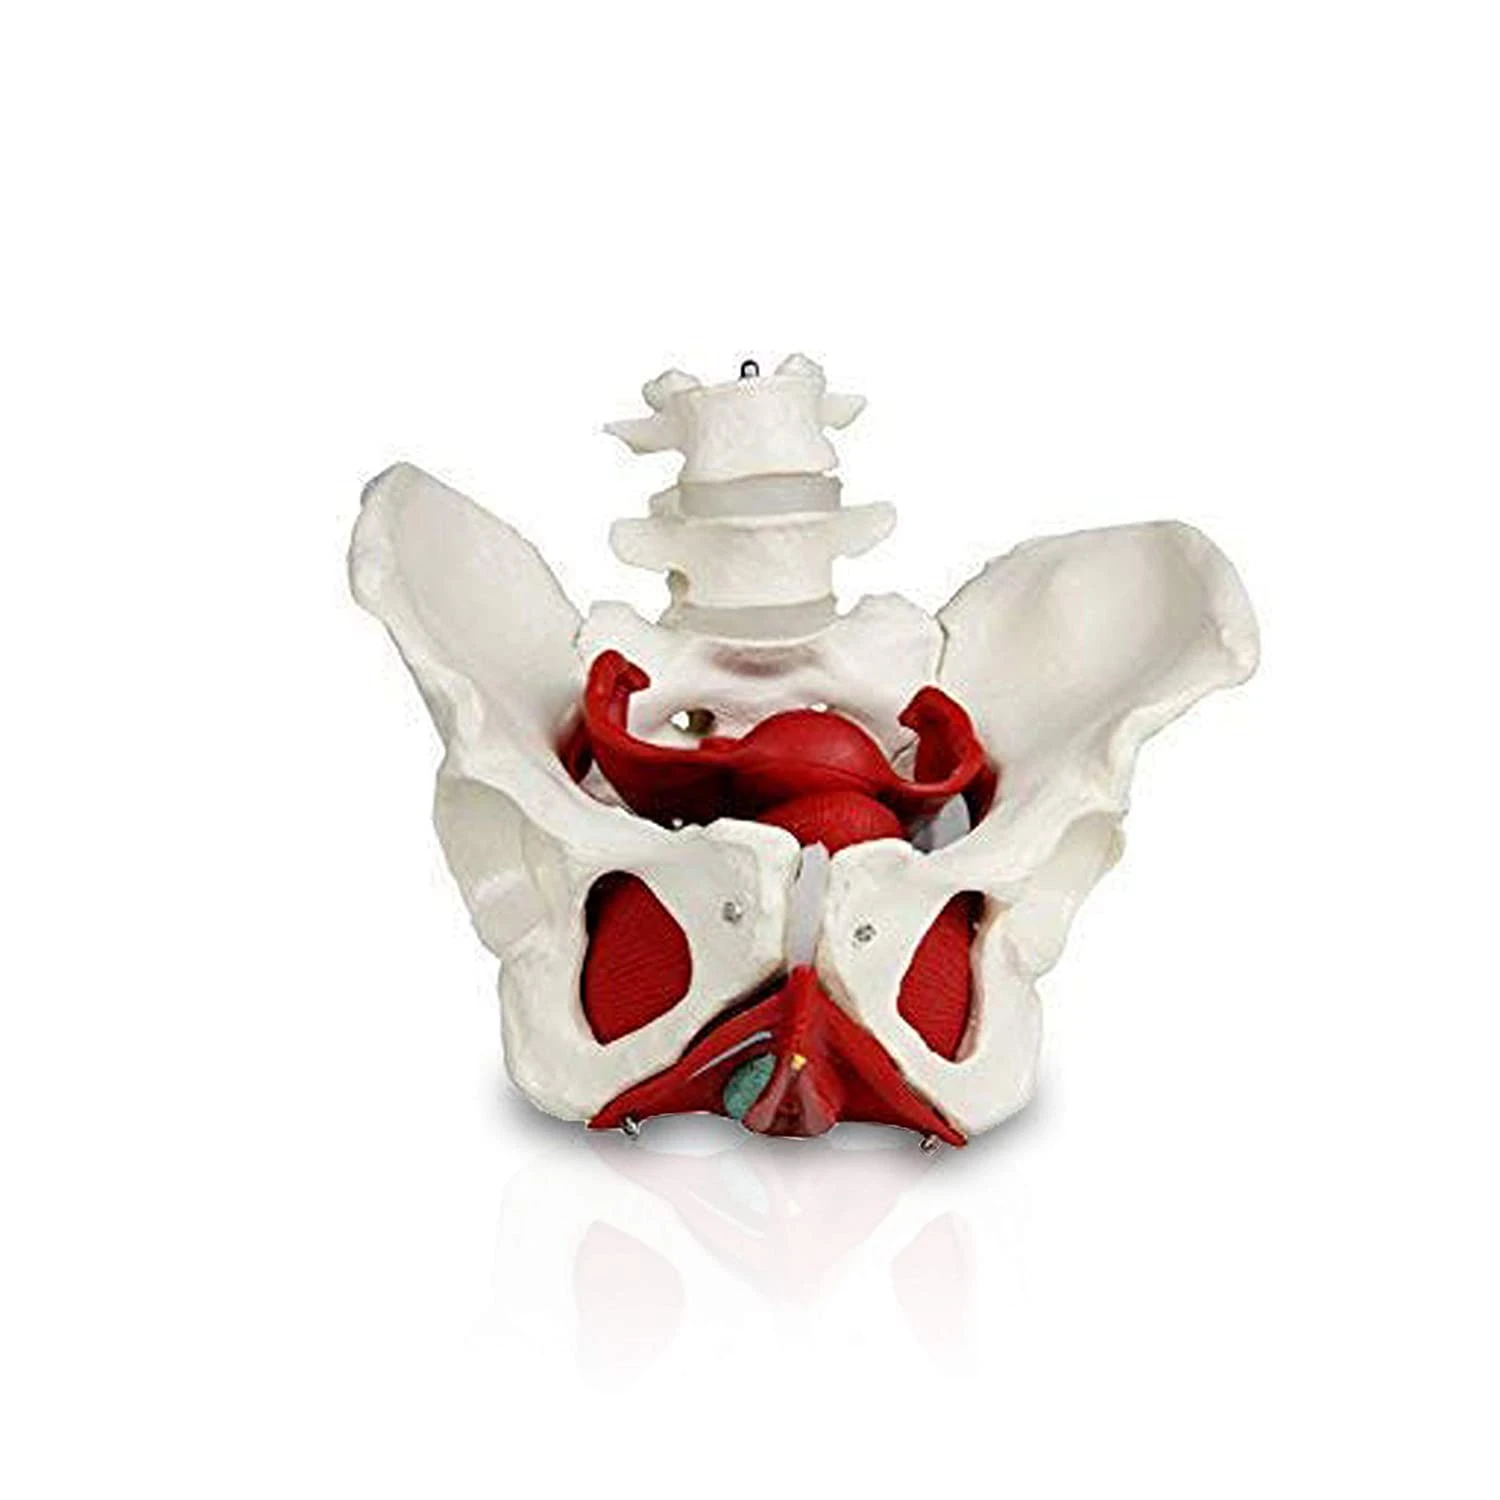 Female Pelvis with Organs Pelvic Floor Muscles and Reproductive Organs Include Uterus, Colon and Bladder